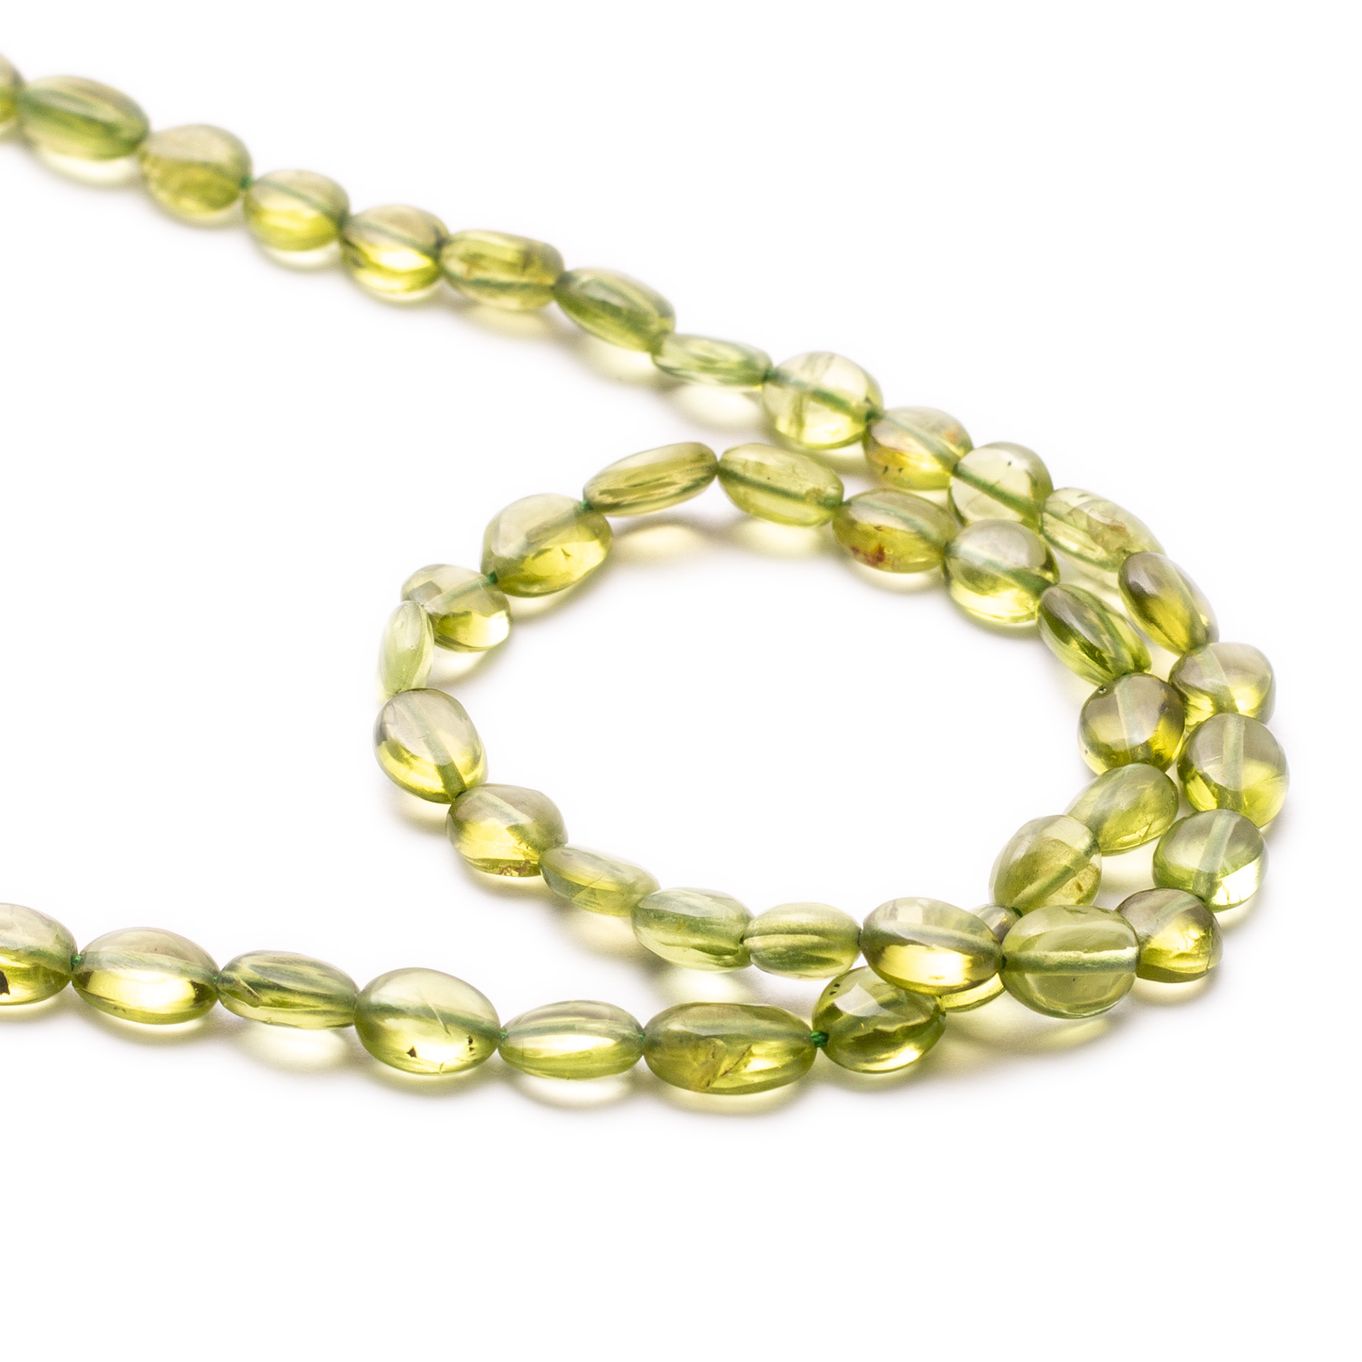 Peridot Flat Oval Nugget Beads - Approx From 8mm